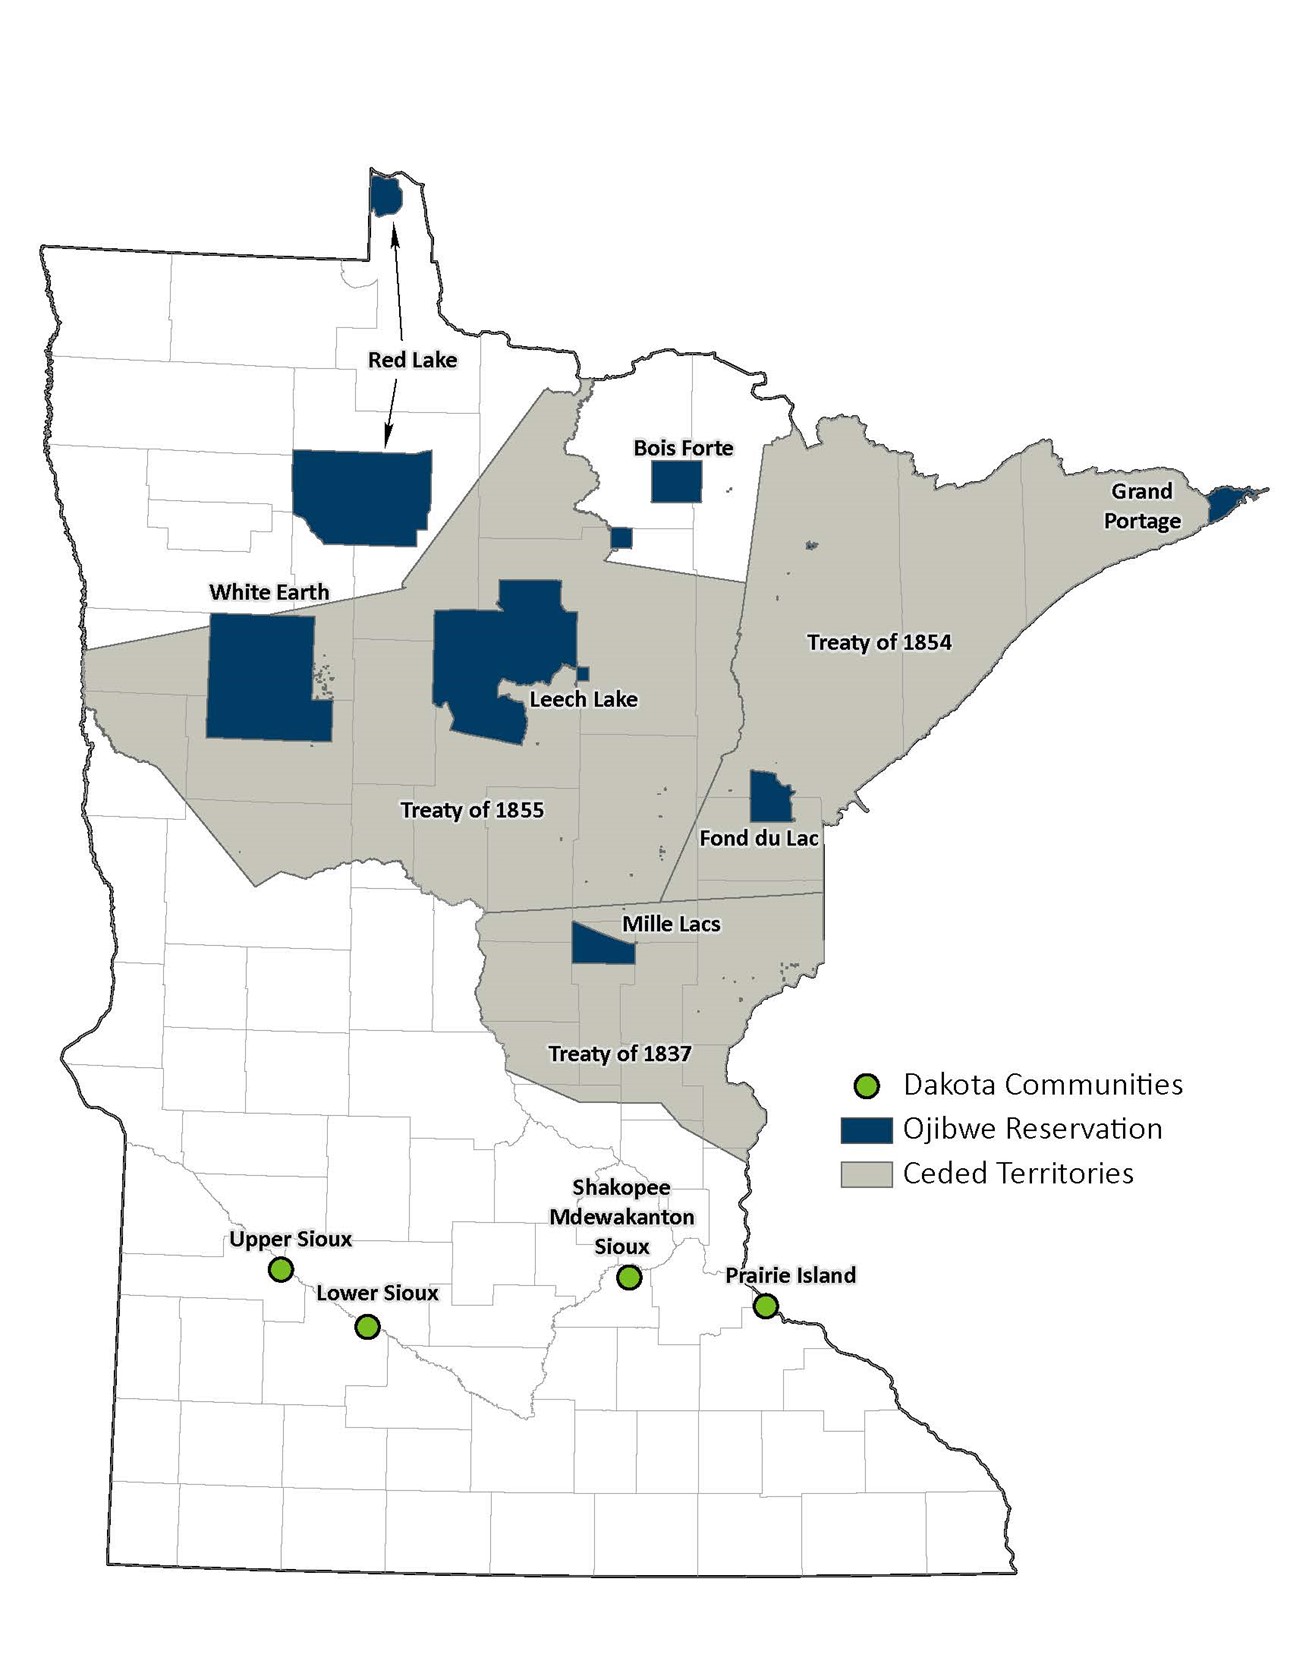 Map of Tribal Boundaries within Minnesota. Map depicts Dakota Communities with a green circle and Ojibwe Reservations with a blue shape. Grey areas denote the ceded territories by treaty.